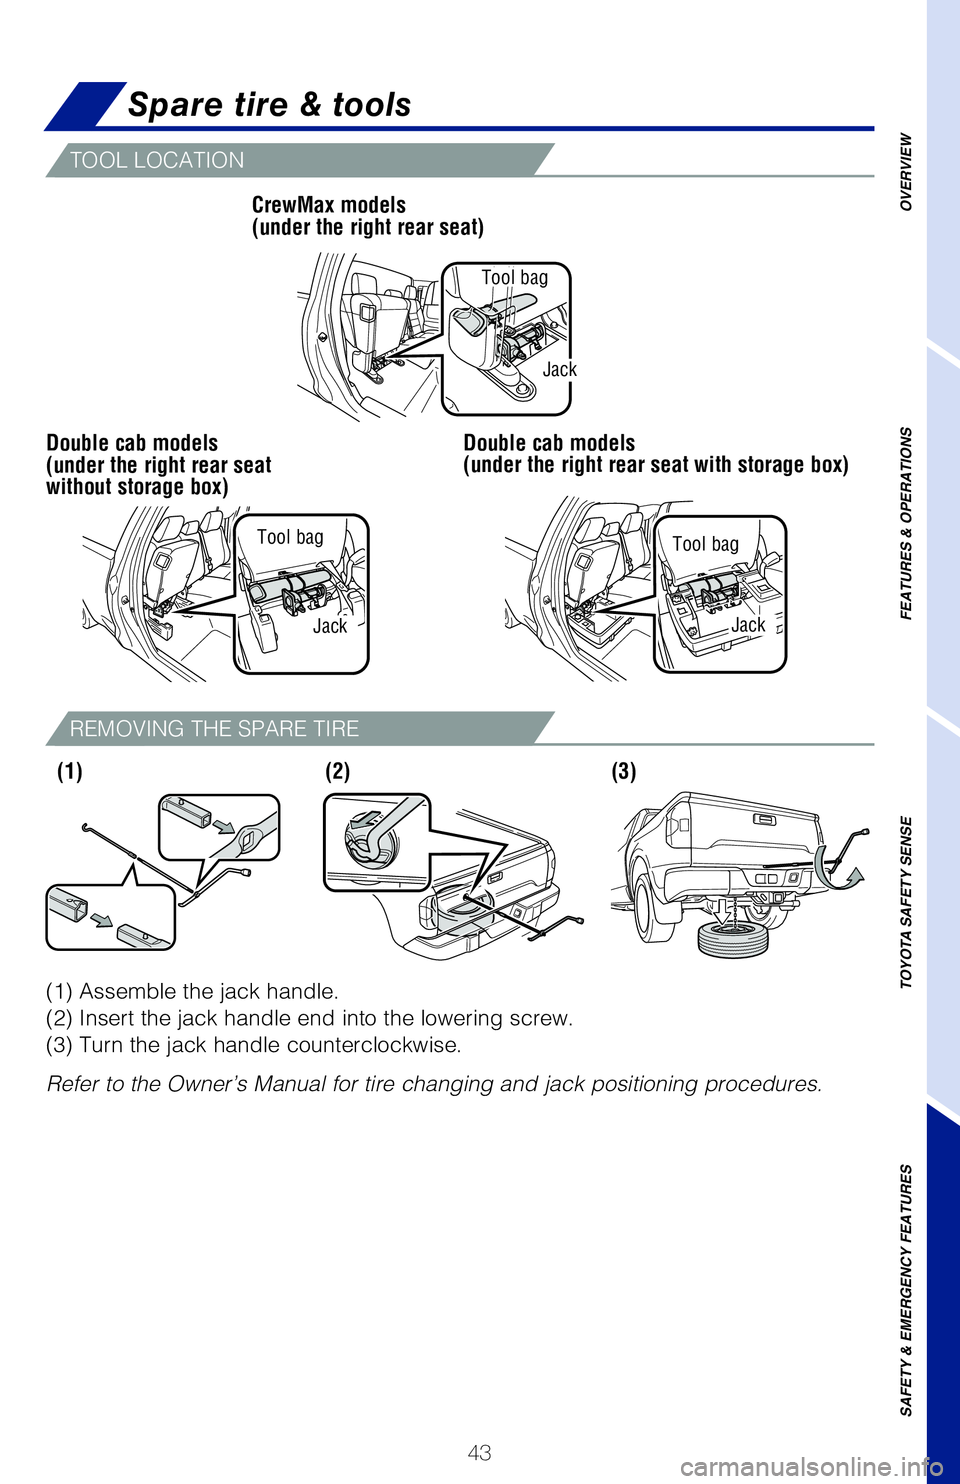 TOYOTA TUNDRA 2021  Owners Manual (in English) 43
Spare tire & tools
TOOL LOCATION
REMOVING THE SPARE TIRE
(1) Assemble the jack handle.
(2) Insert the jack handle end into the lowering screw.
(3) Turn the jack handle counterclockwise.
Refer to th